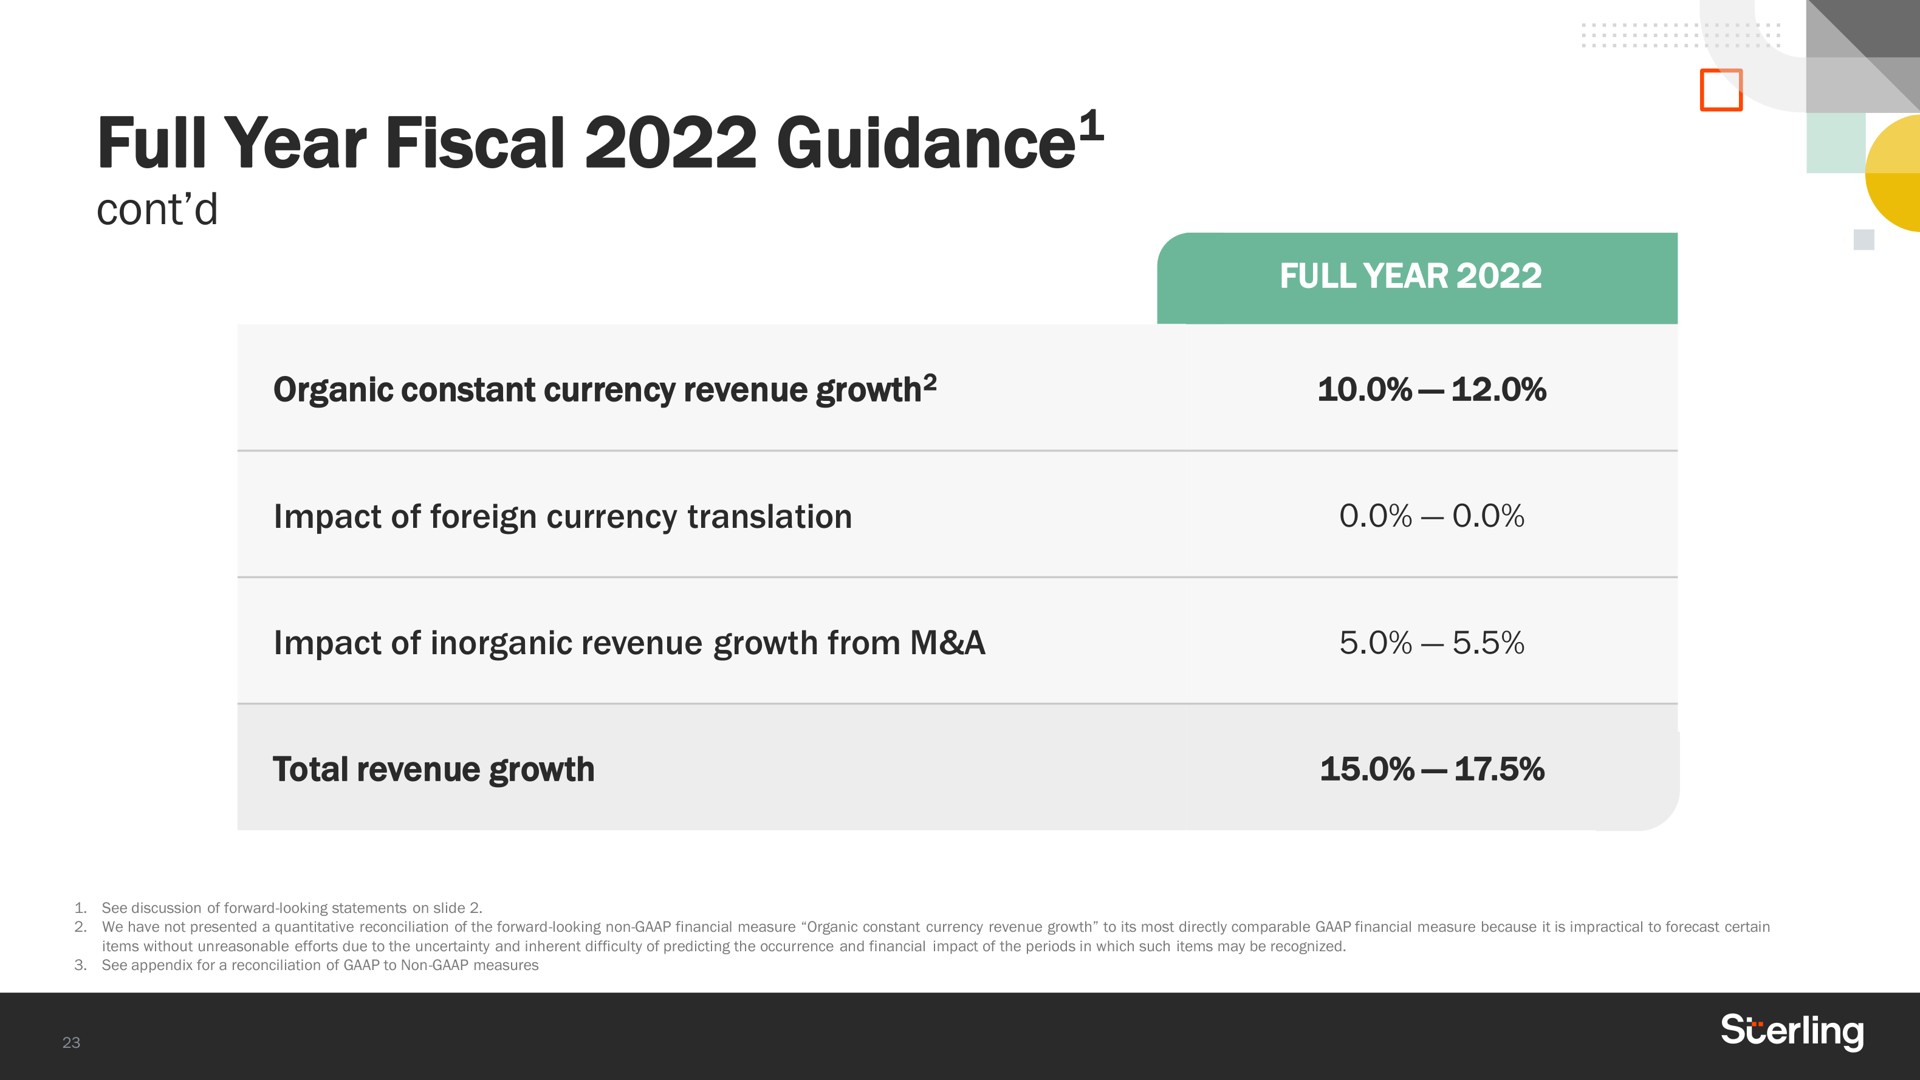 full year fiscal guidance full year organic constant currency revenue growth impact of foreign currency translation impact of inorganic revenue growth from a total revenue growth guidance | Sterling